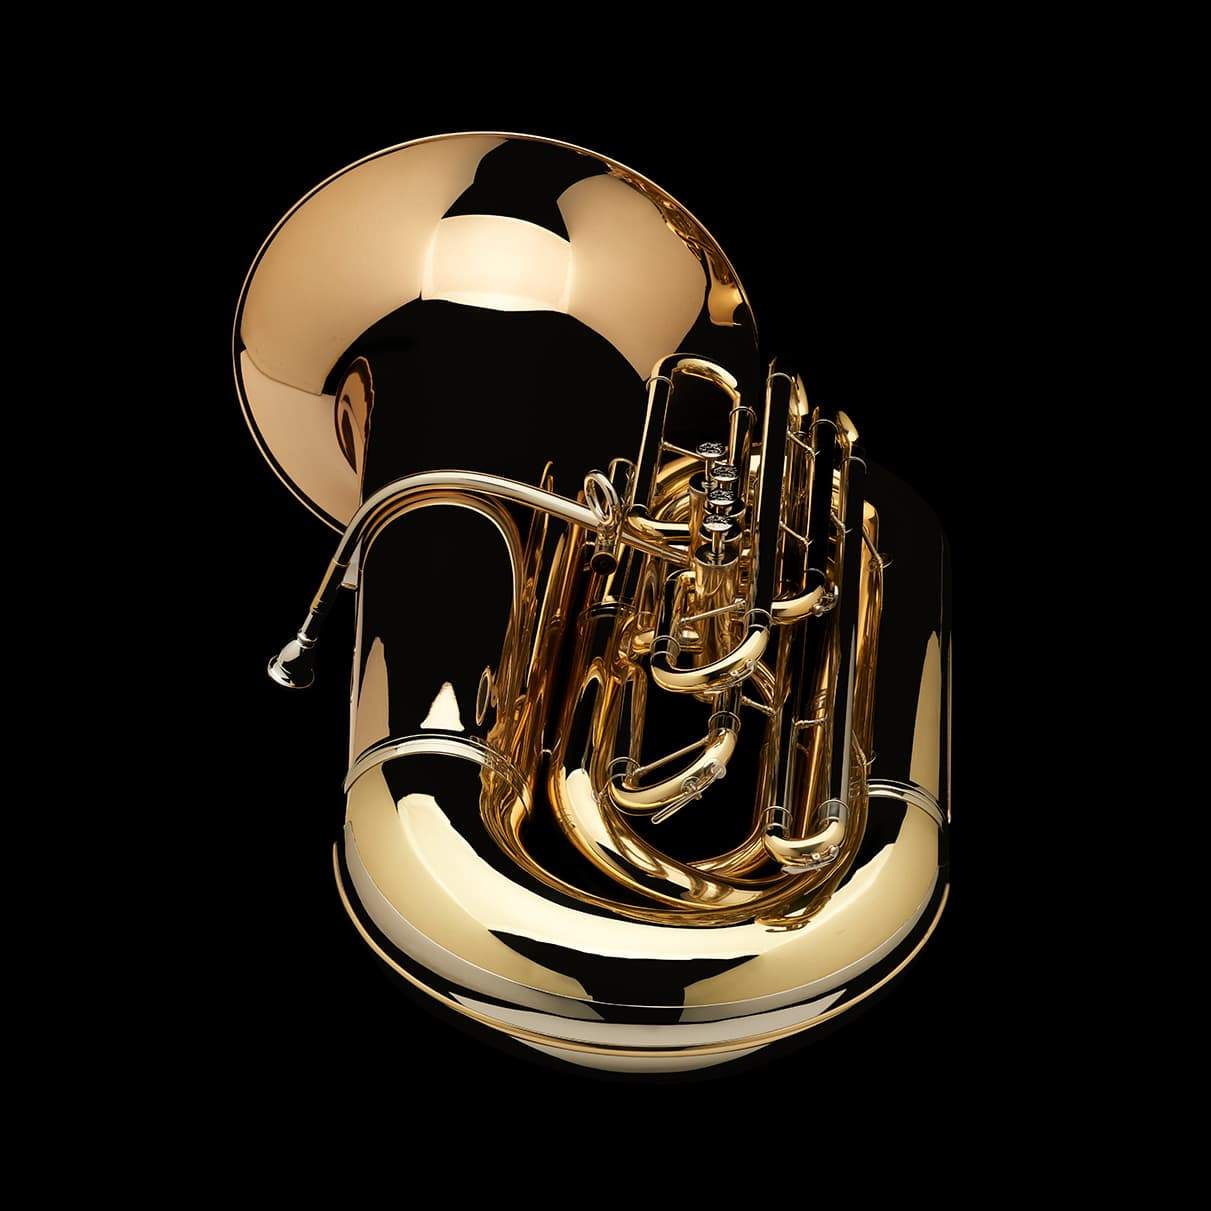 An image of the back of a BBb 6/4 Front-Piston Tuba "Grand" from Wessex Tubas, lying flat